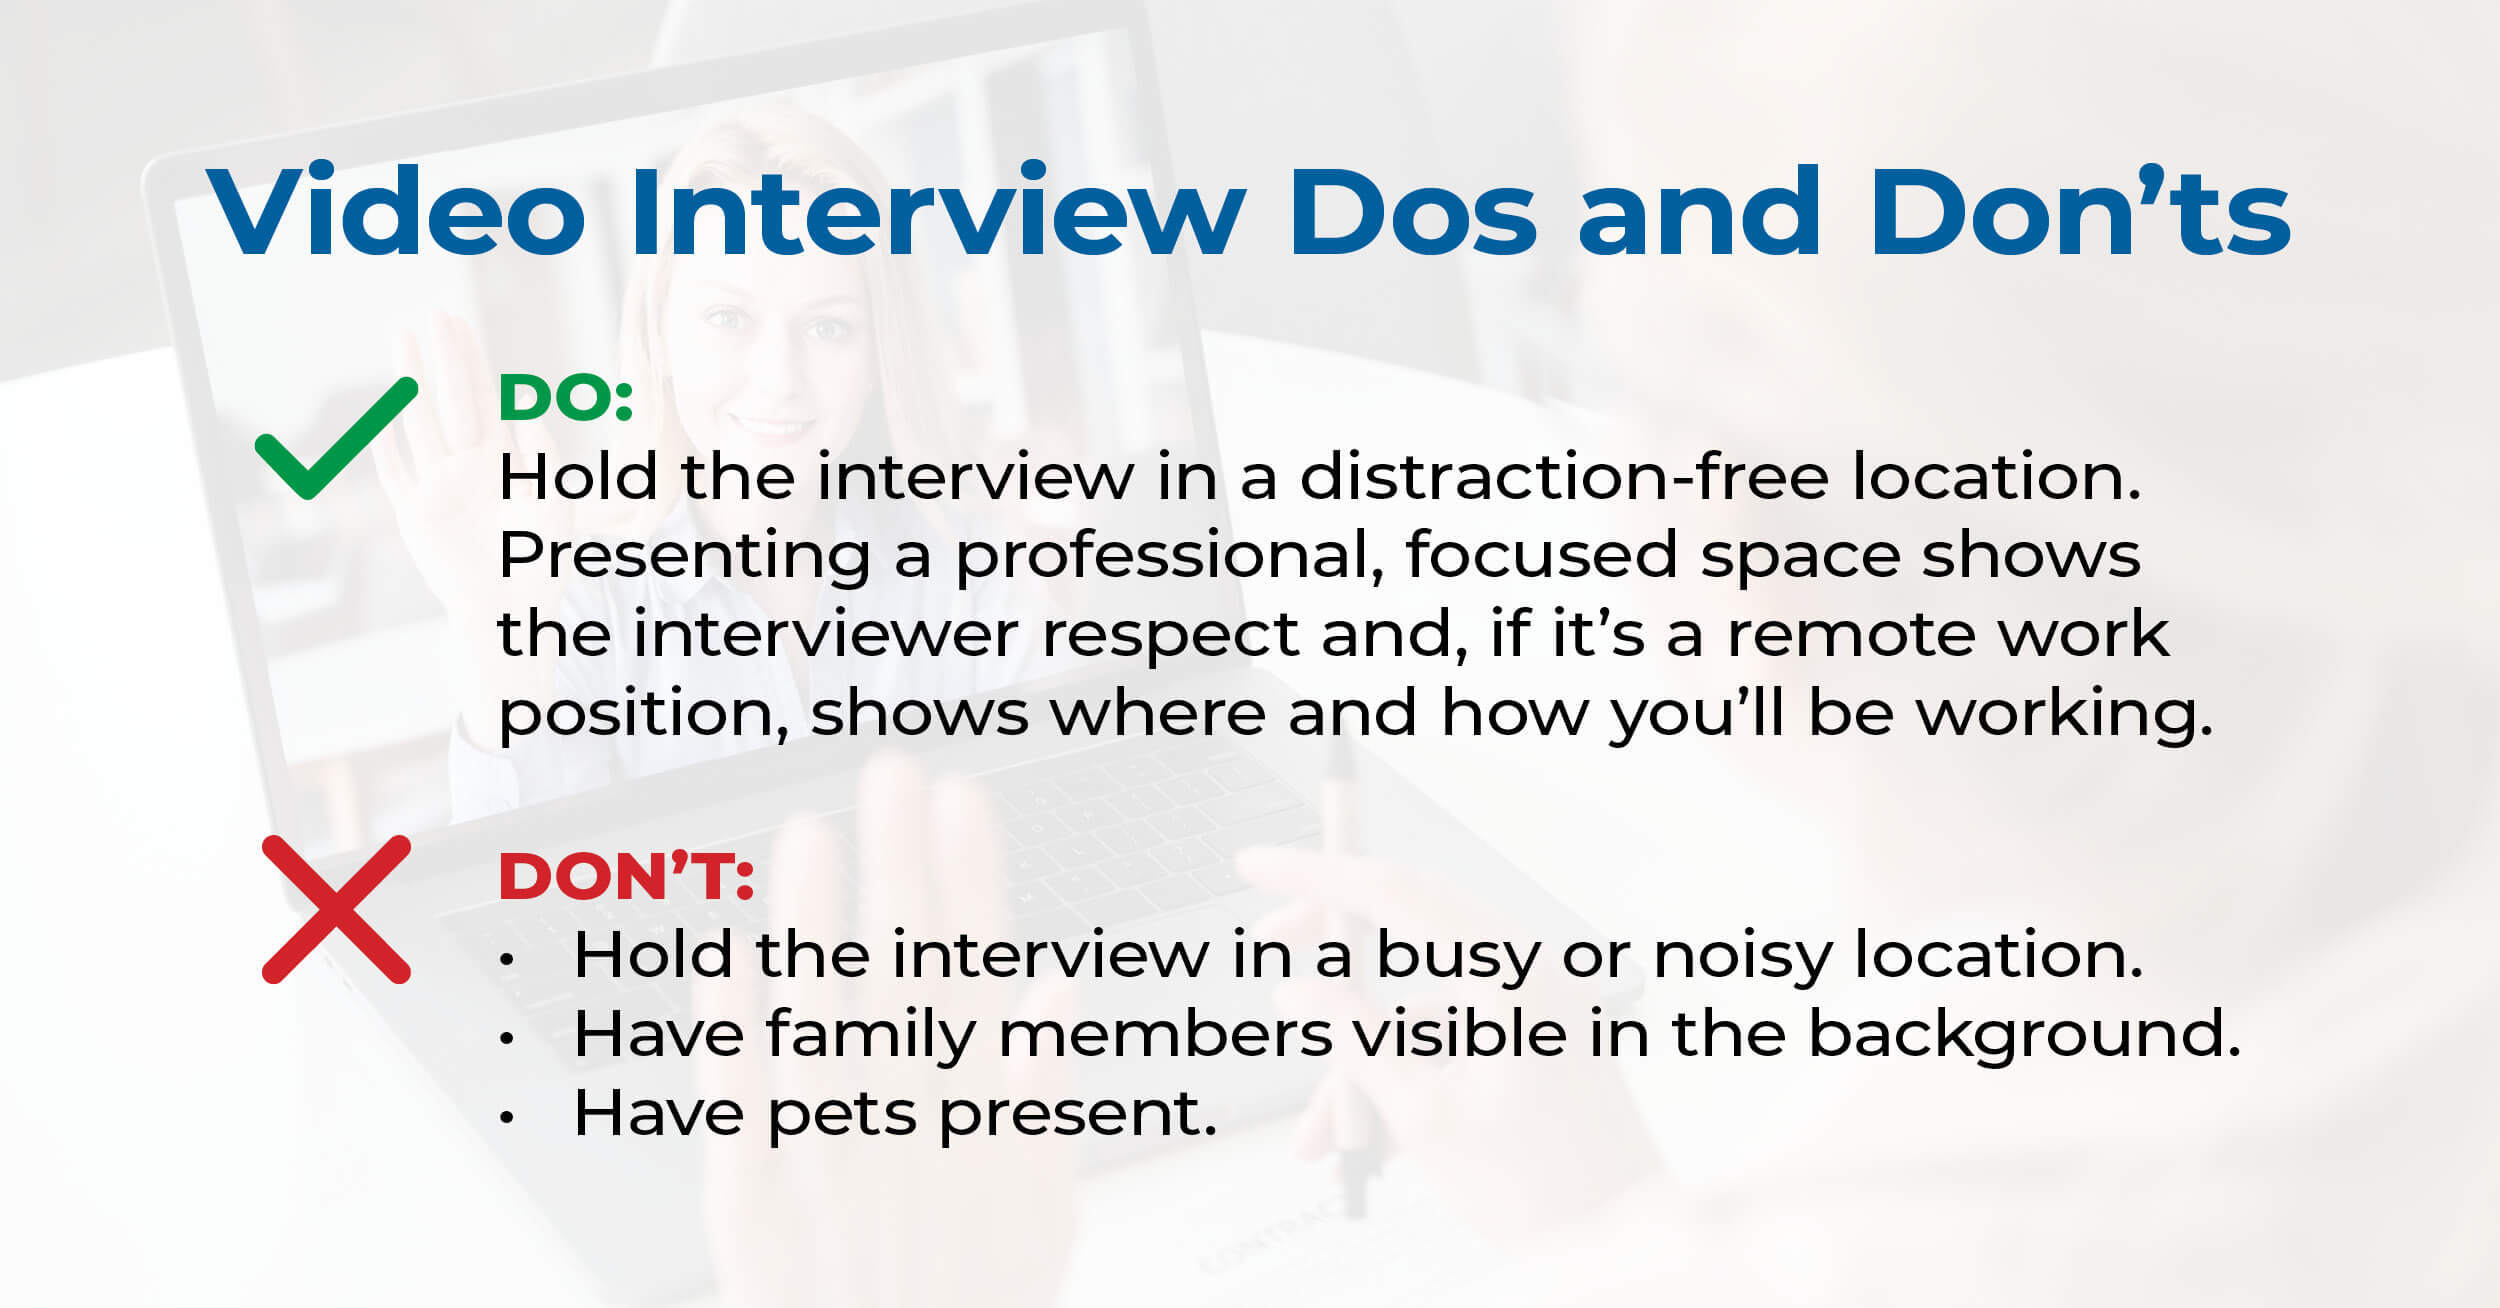 Video interview dos and don'ts.